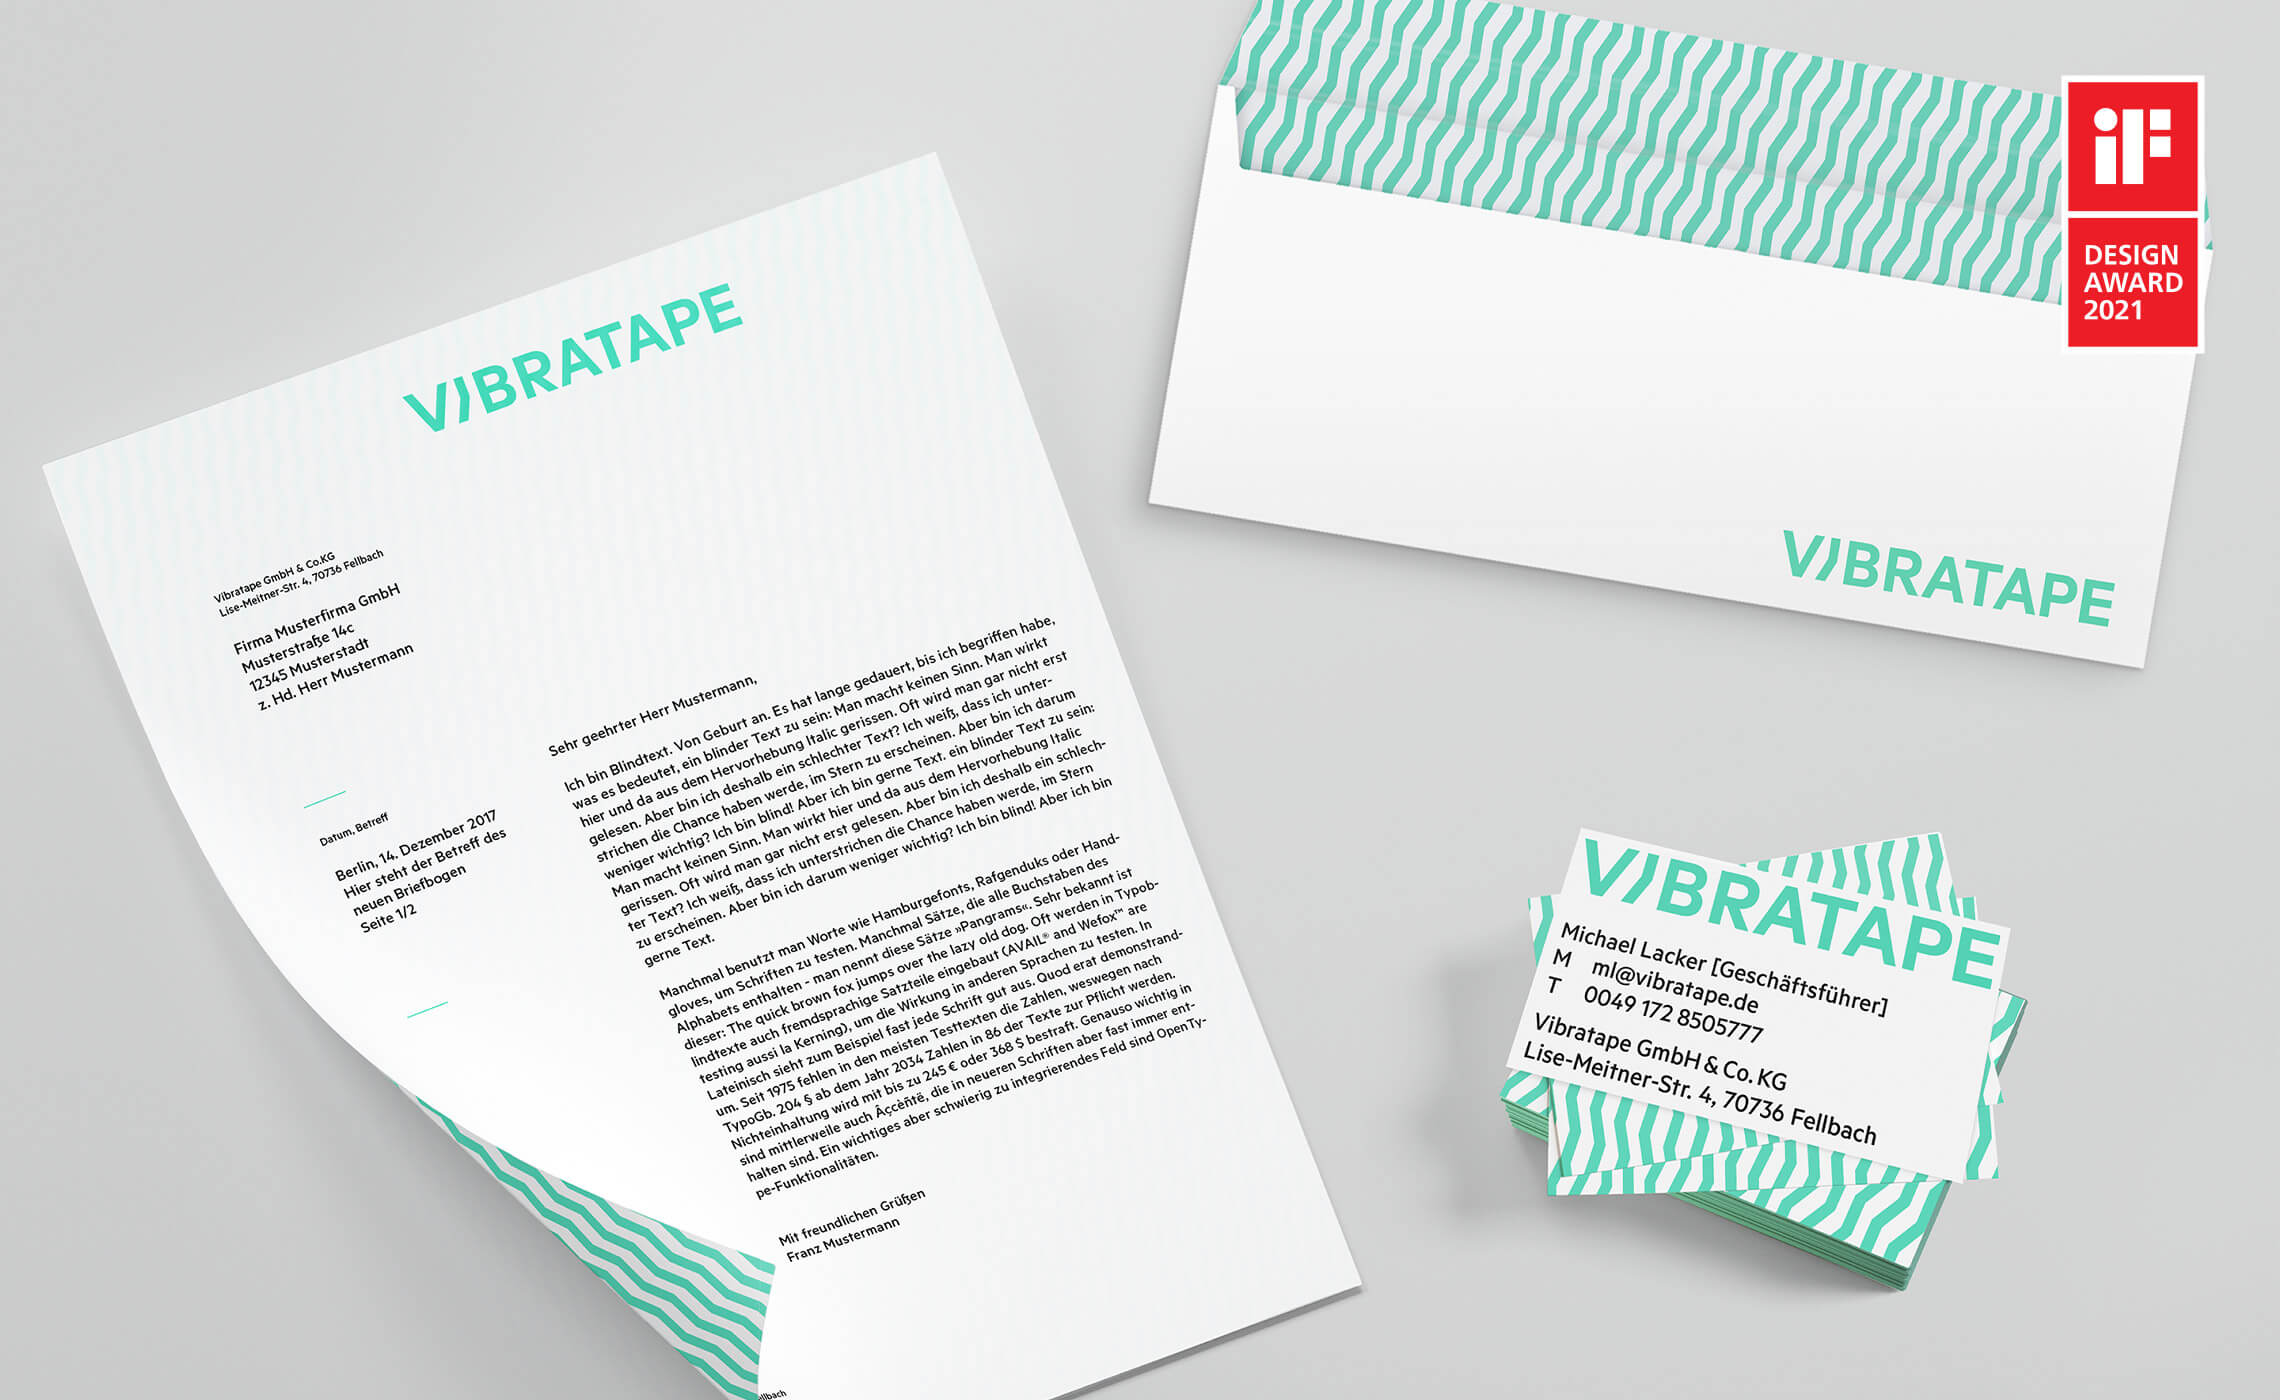 This picture shows Vibratape's business stationery with the IF Design Award logo.